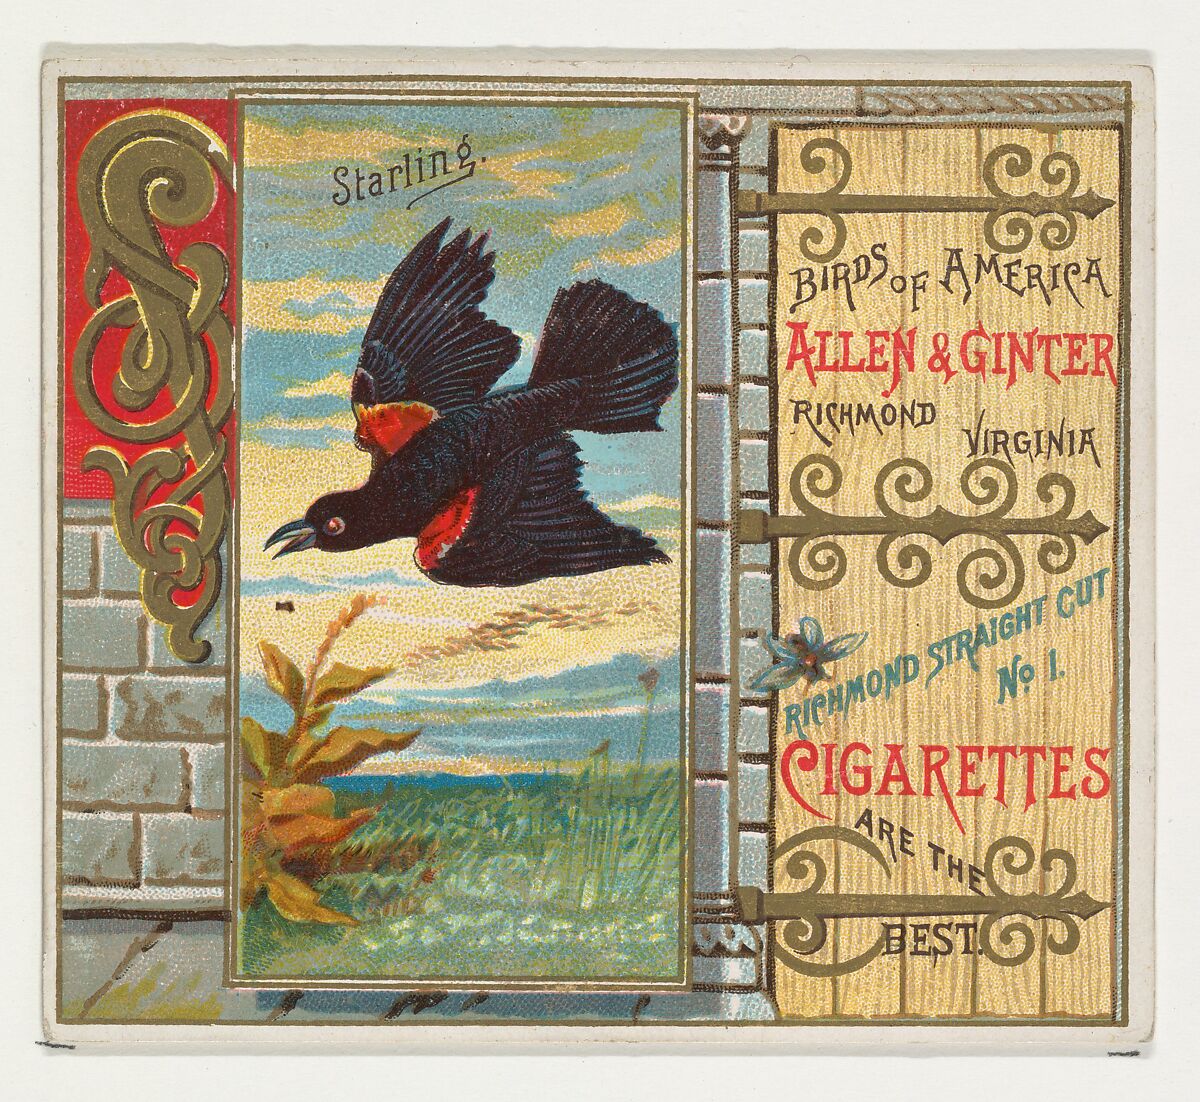 Starling, from the Birds of America series (N37) for Allen & Ginter Cigarettes, Issued by Allen &amp; Ginter (American, Richmond, Virginia), Commercial color lithograph 